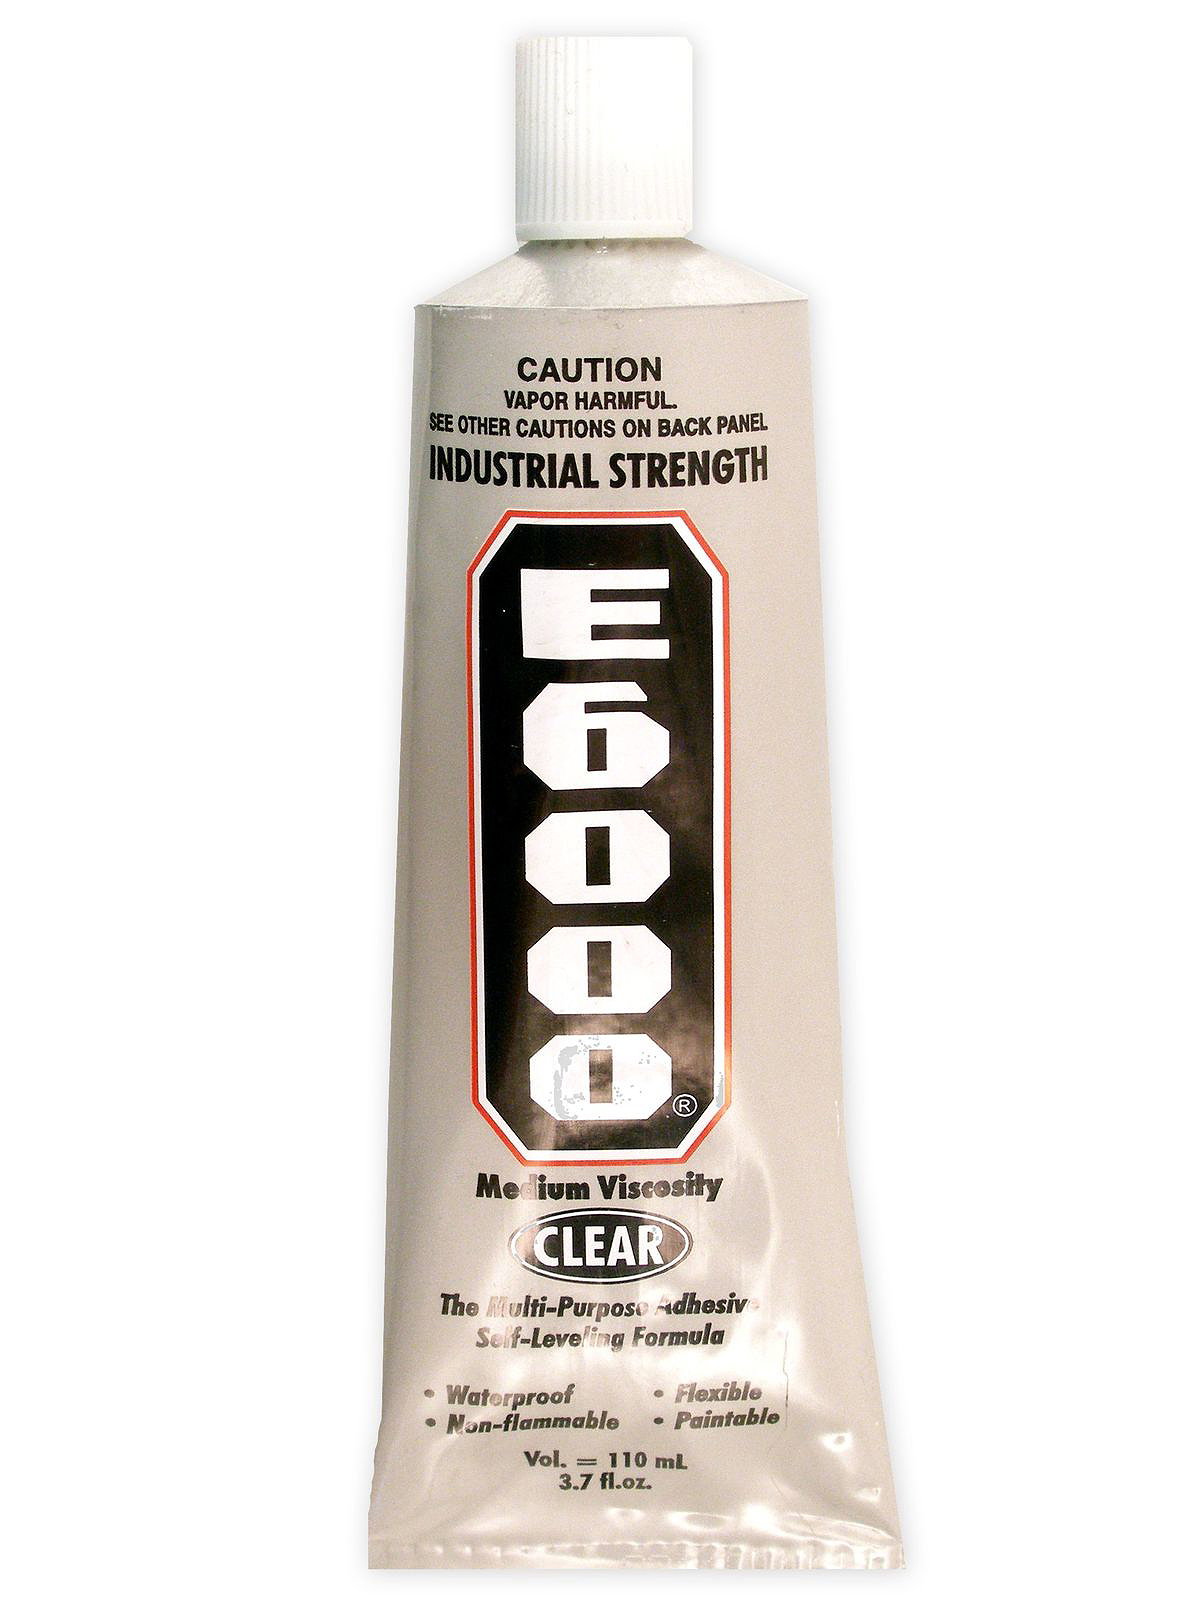 E-6000 Industrial Strength Adhesive, 2.0 Ounces, Mardel